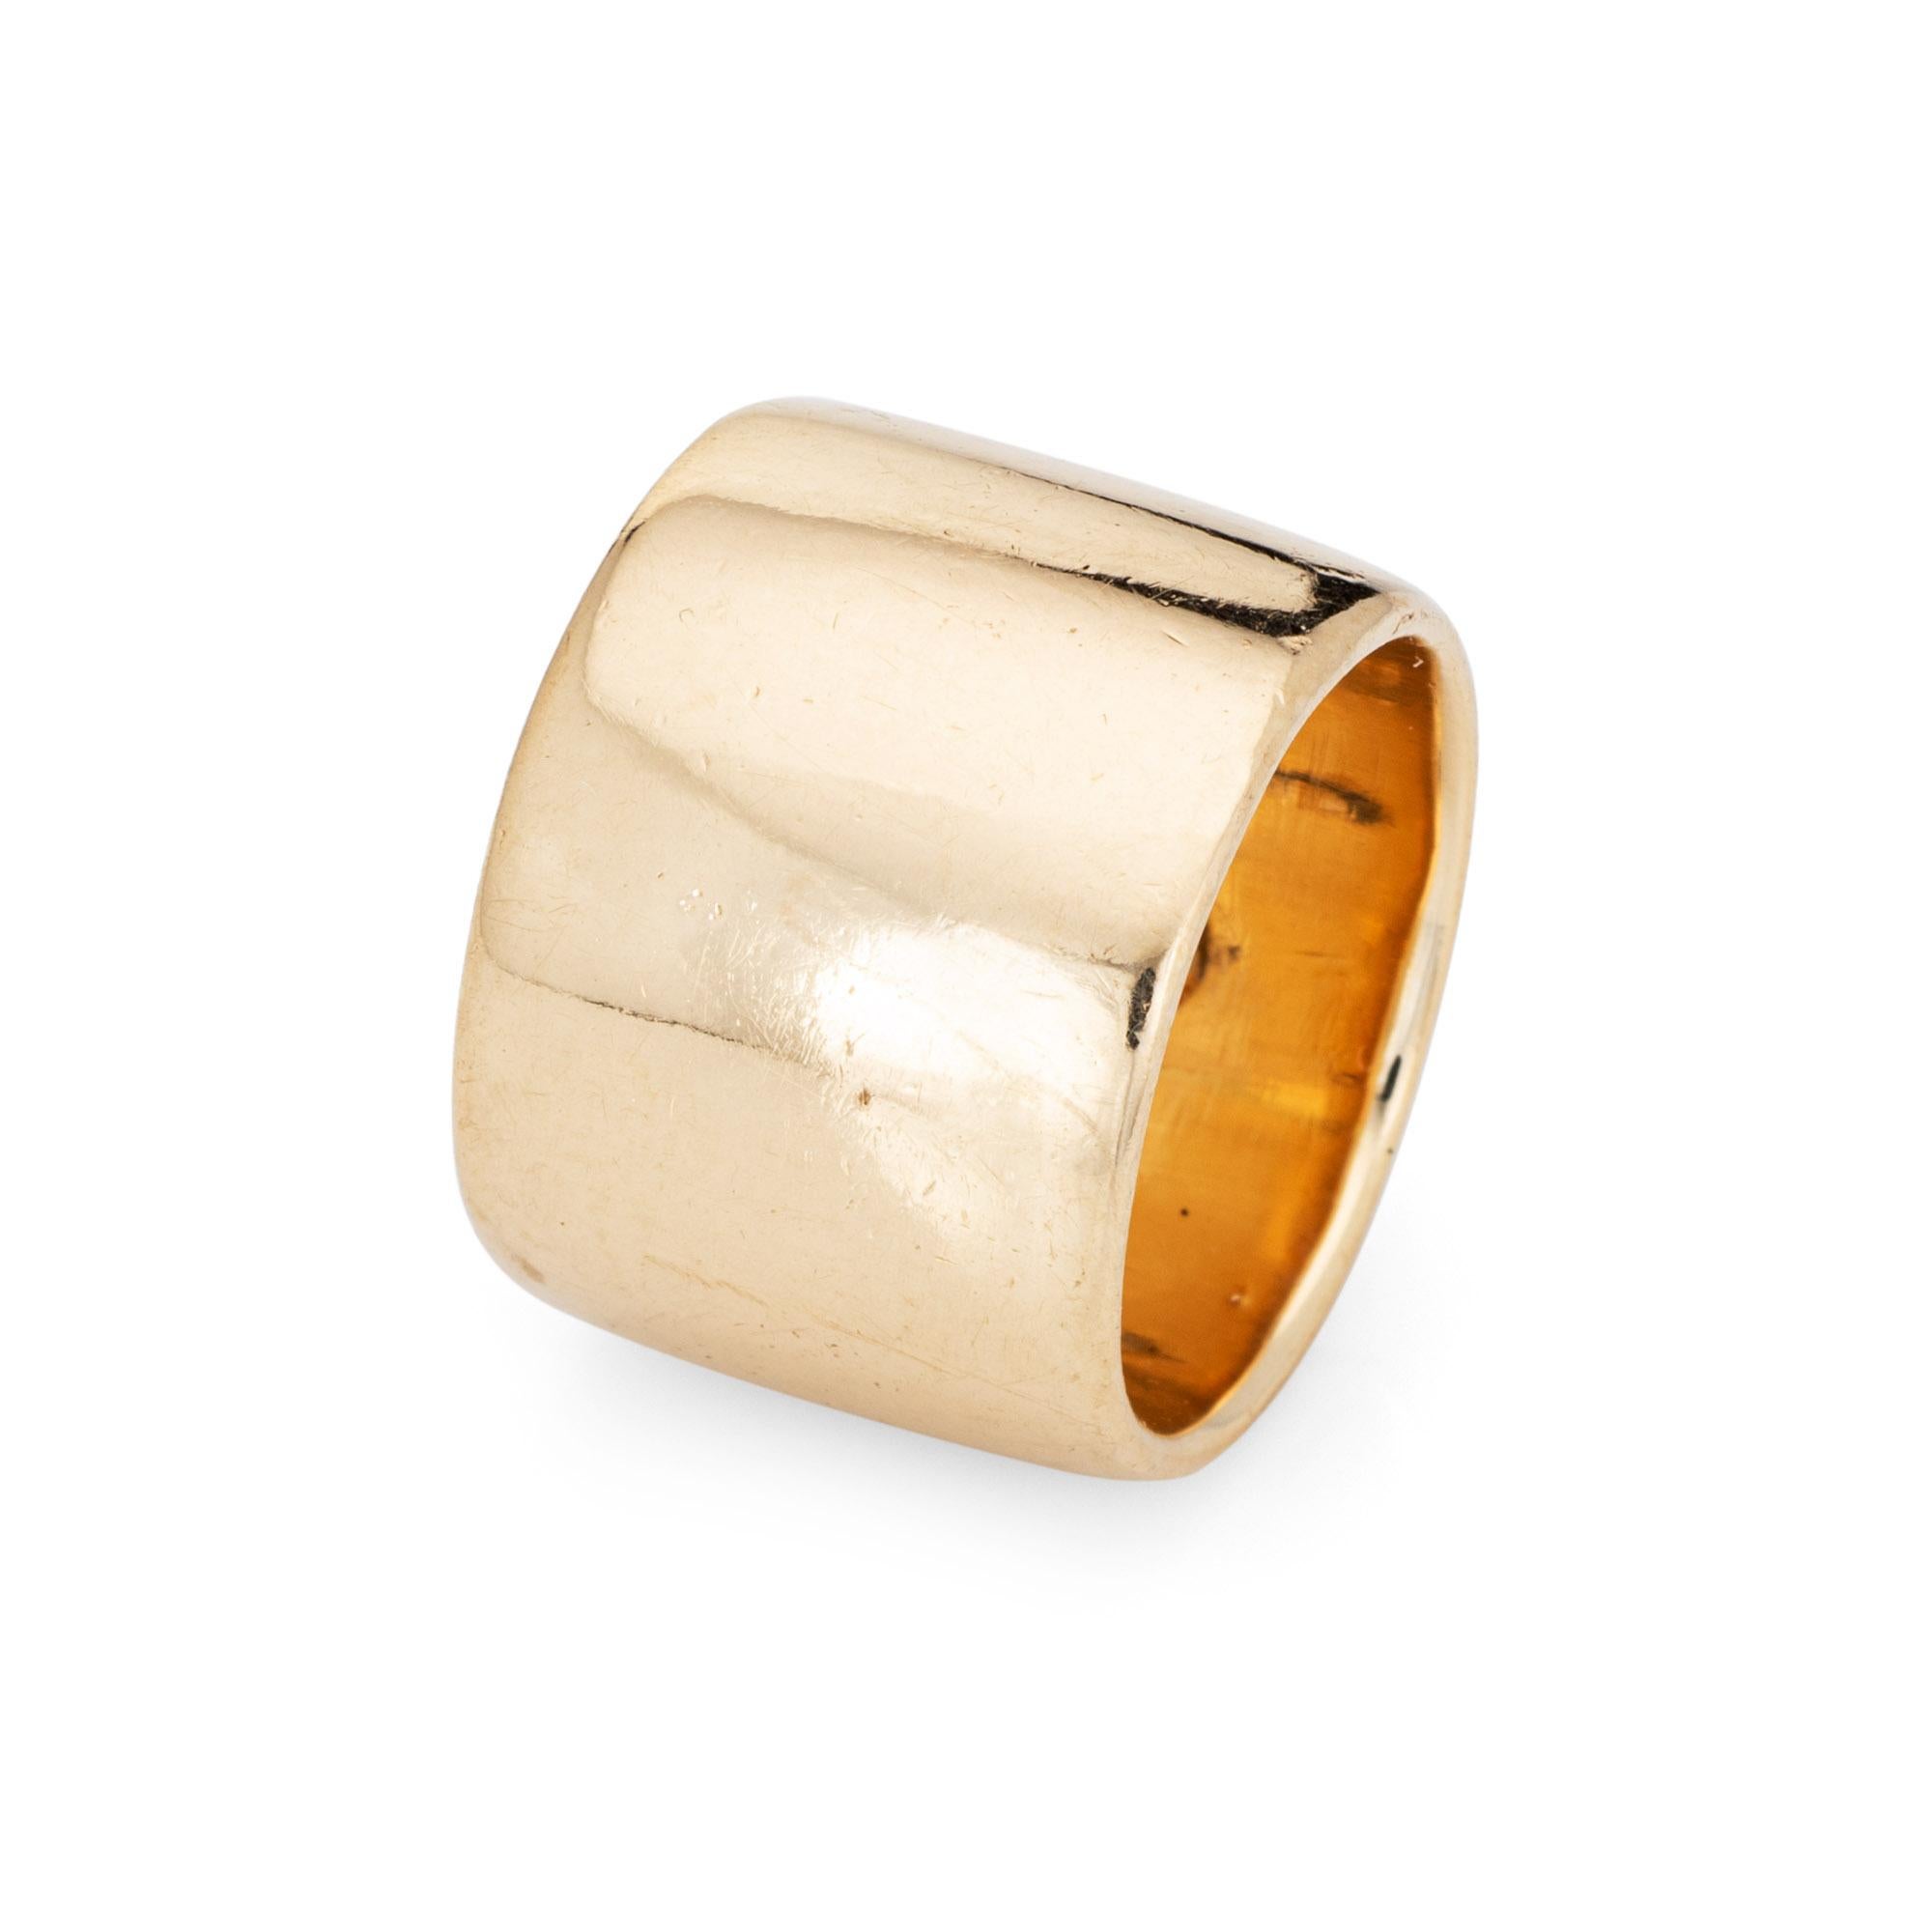 Stylish vintage wide band cigar ring crafted in 14 karat yellow gold (circa 1970s to 1980s). 

The wide band ring (16mm - 0.62 inches) makes a great statement on the hand. The polished gold ring can be worn alone or stacked with your fine jewelry